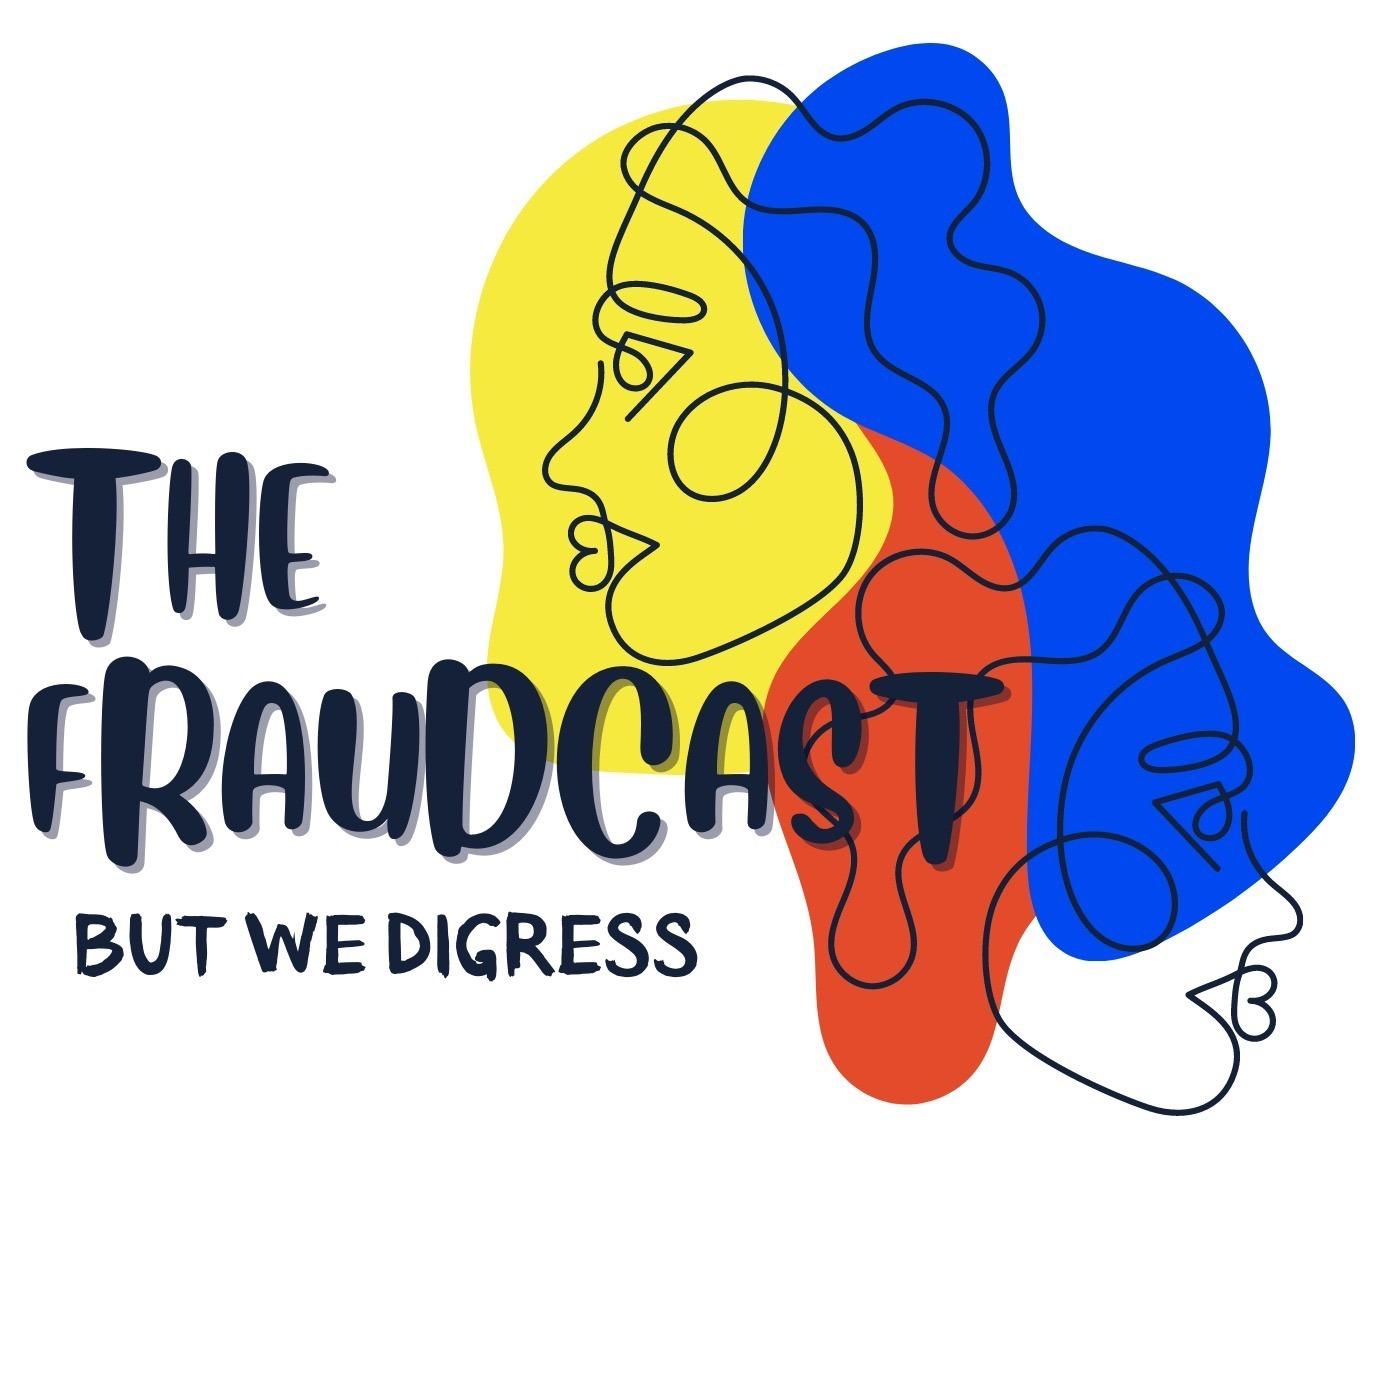 Rose Kelly Patreon Porn - The Fraudcast: But We Digress | RedCircle